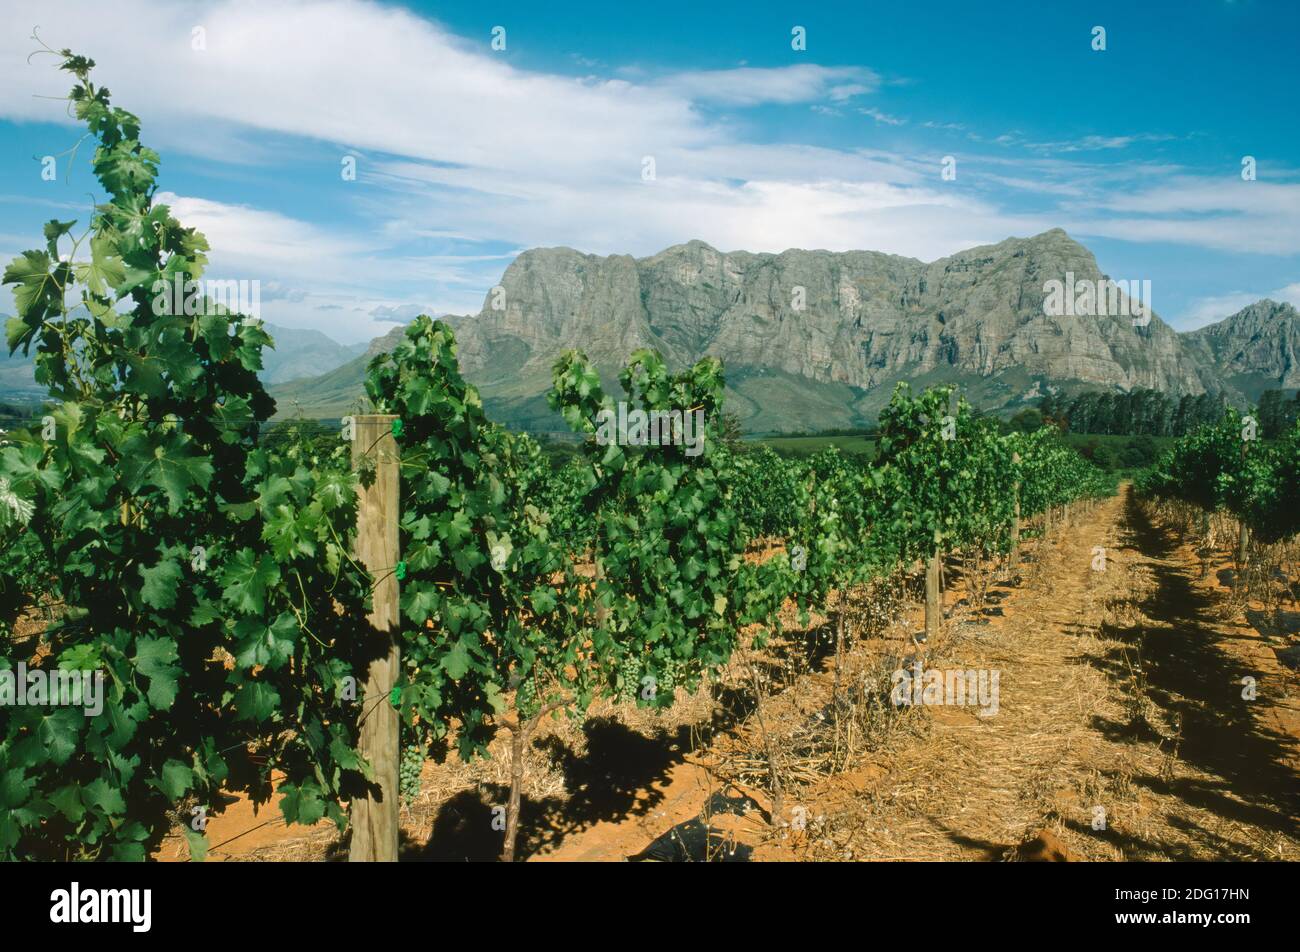 Delaire Graff the vineyard in the sky, Stellenbosch South Africa Stock Photo